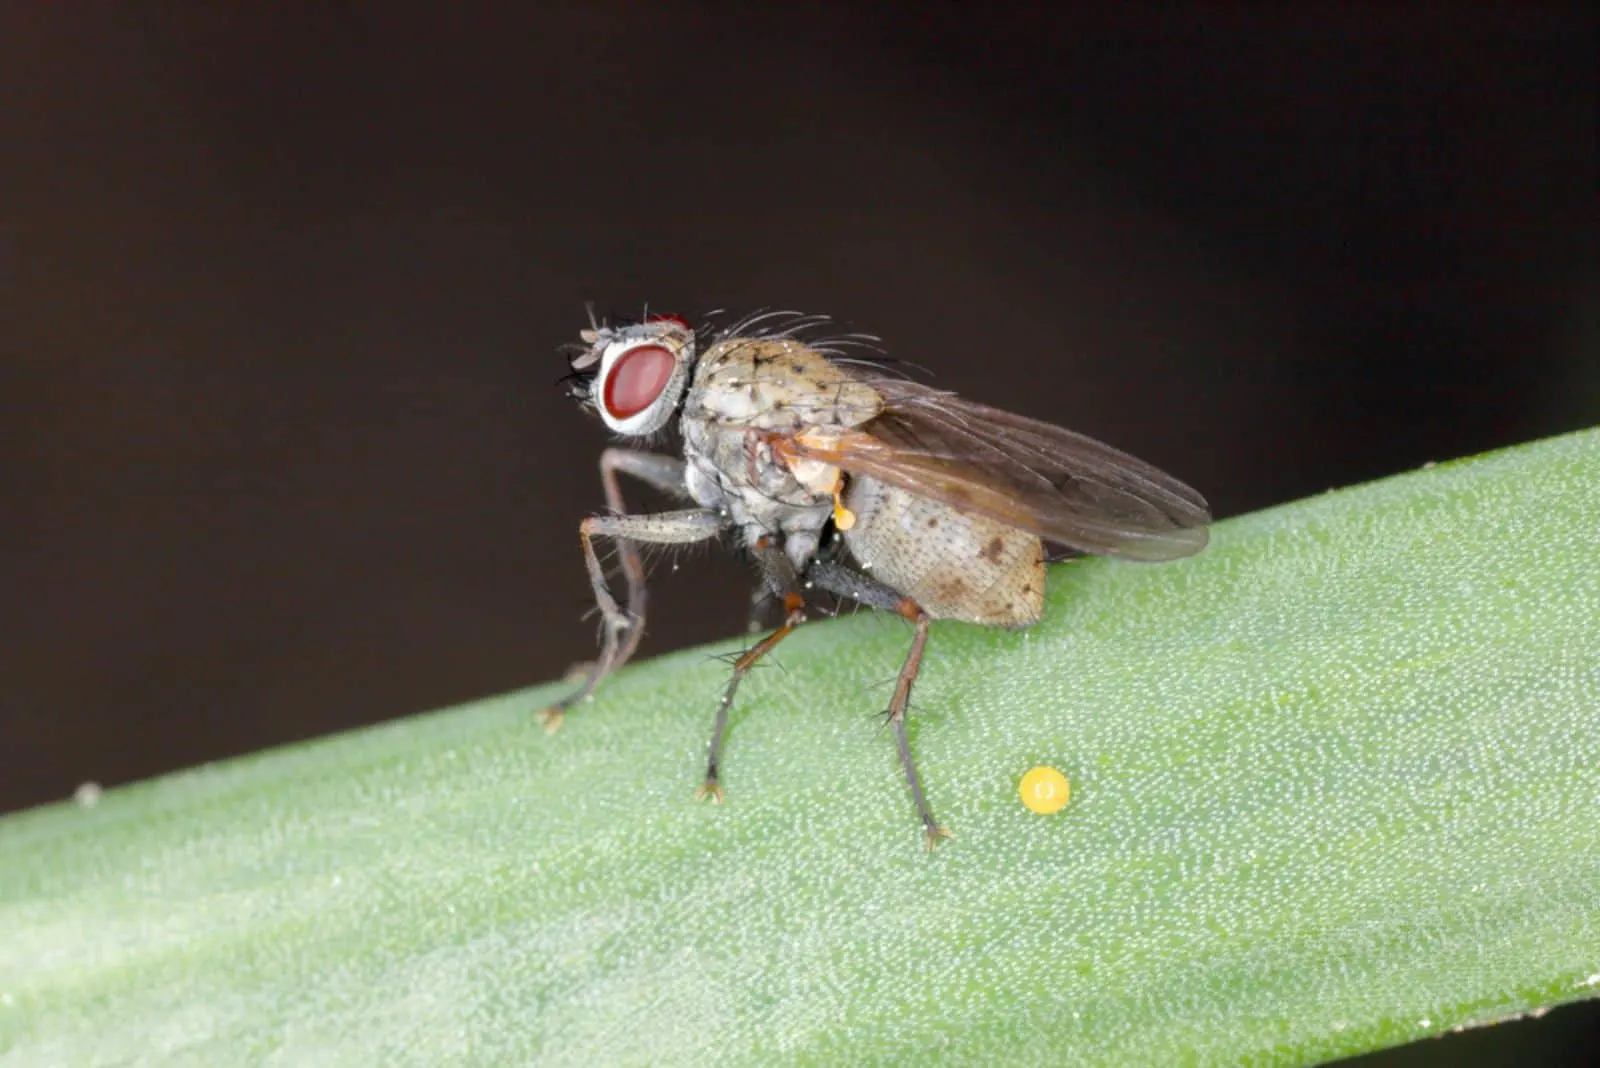 Delia antiqua, commonly known as the onion fly, is a cosmopolitan pest of crops